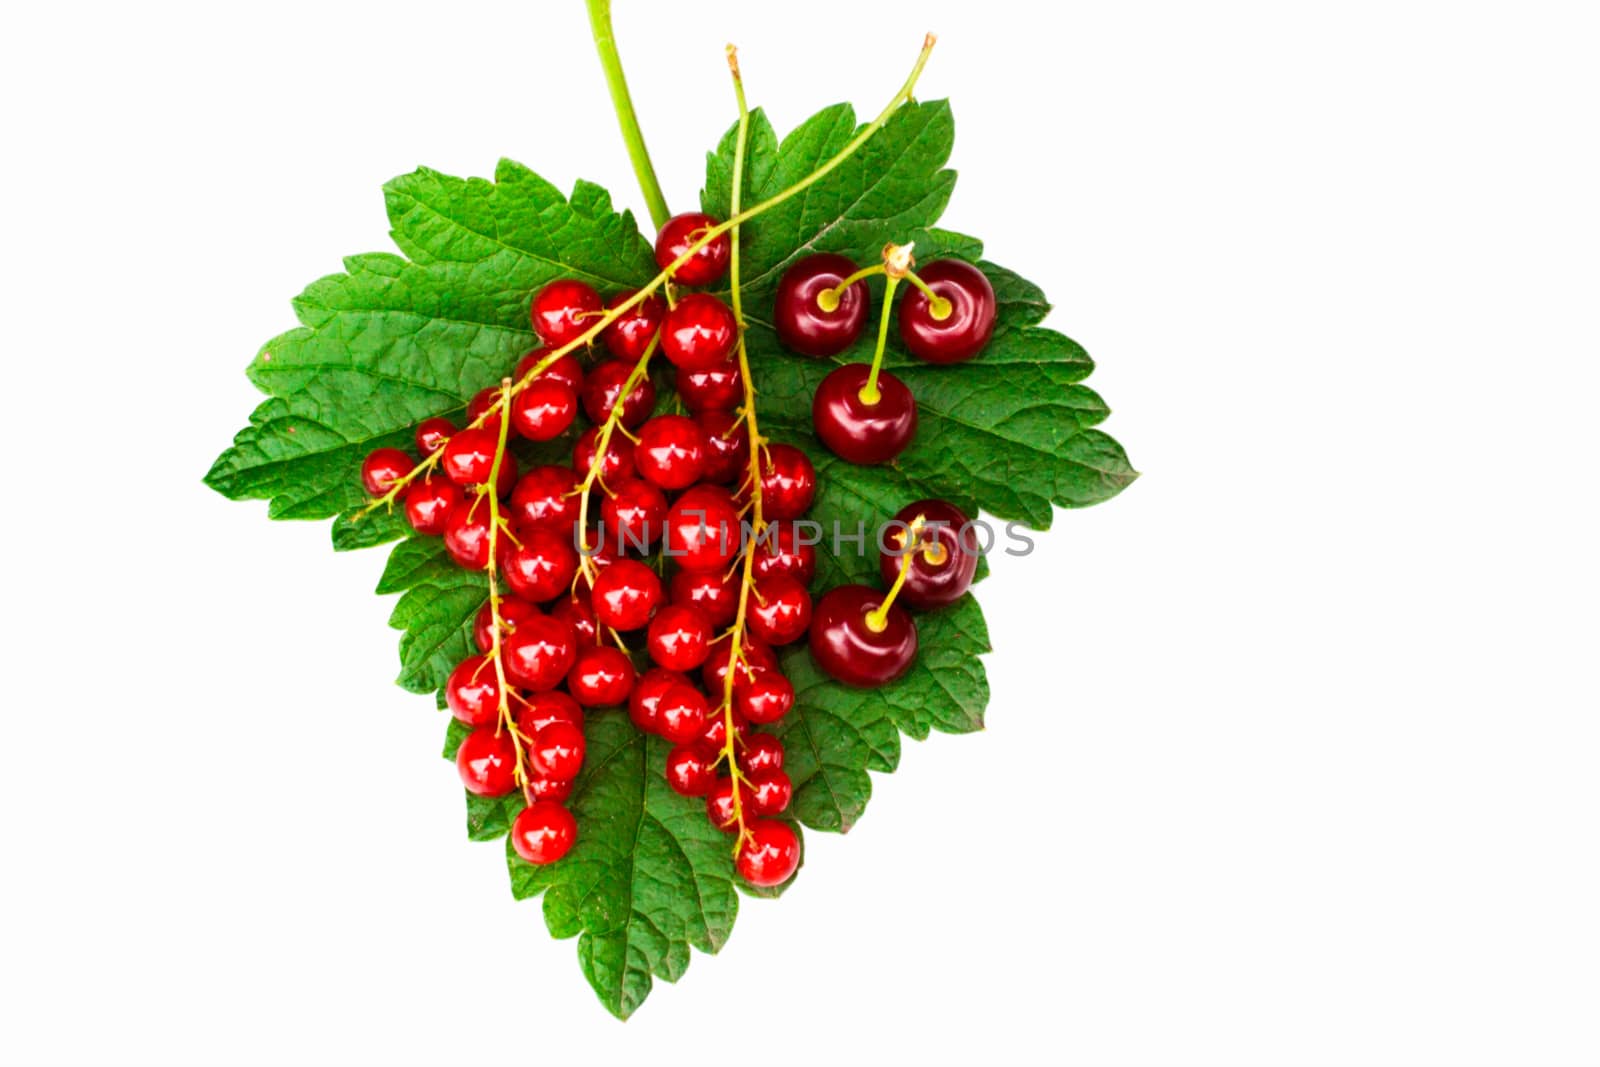 green currant leaf and currant and cherry fruit by client111